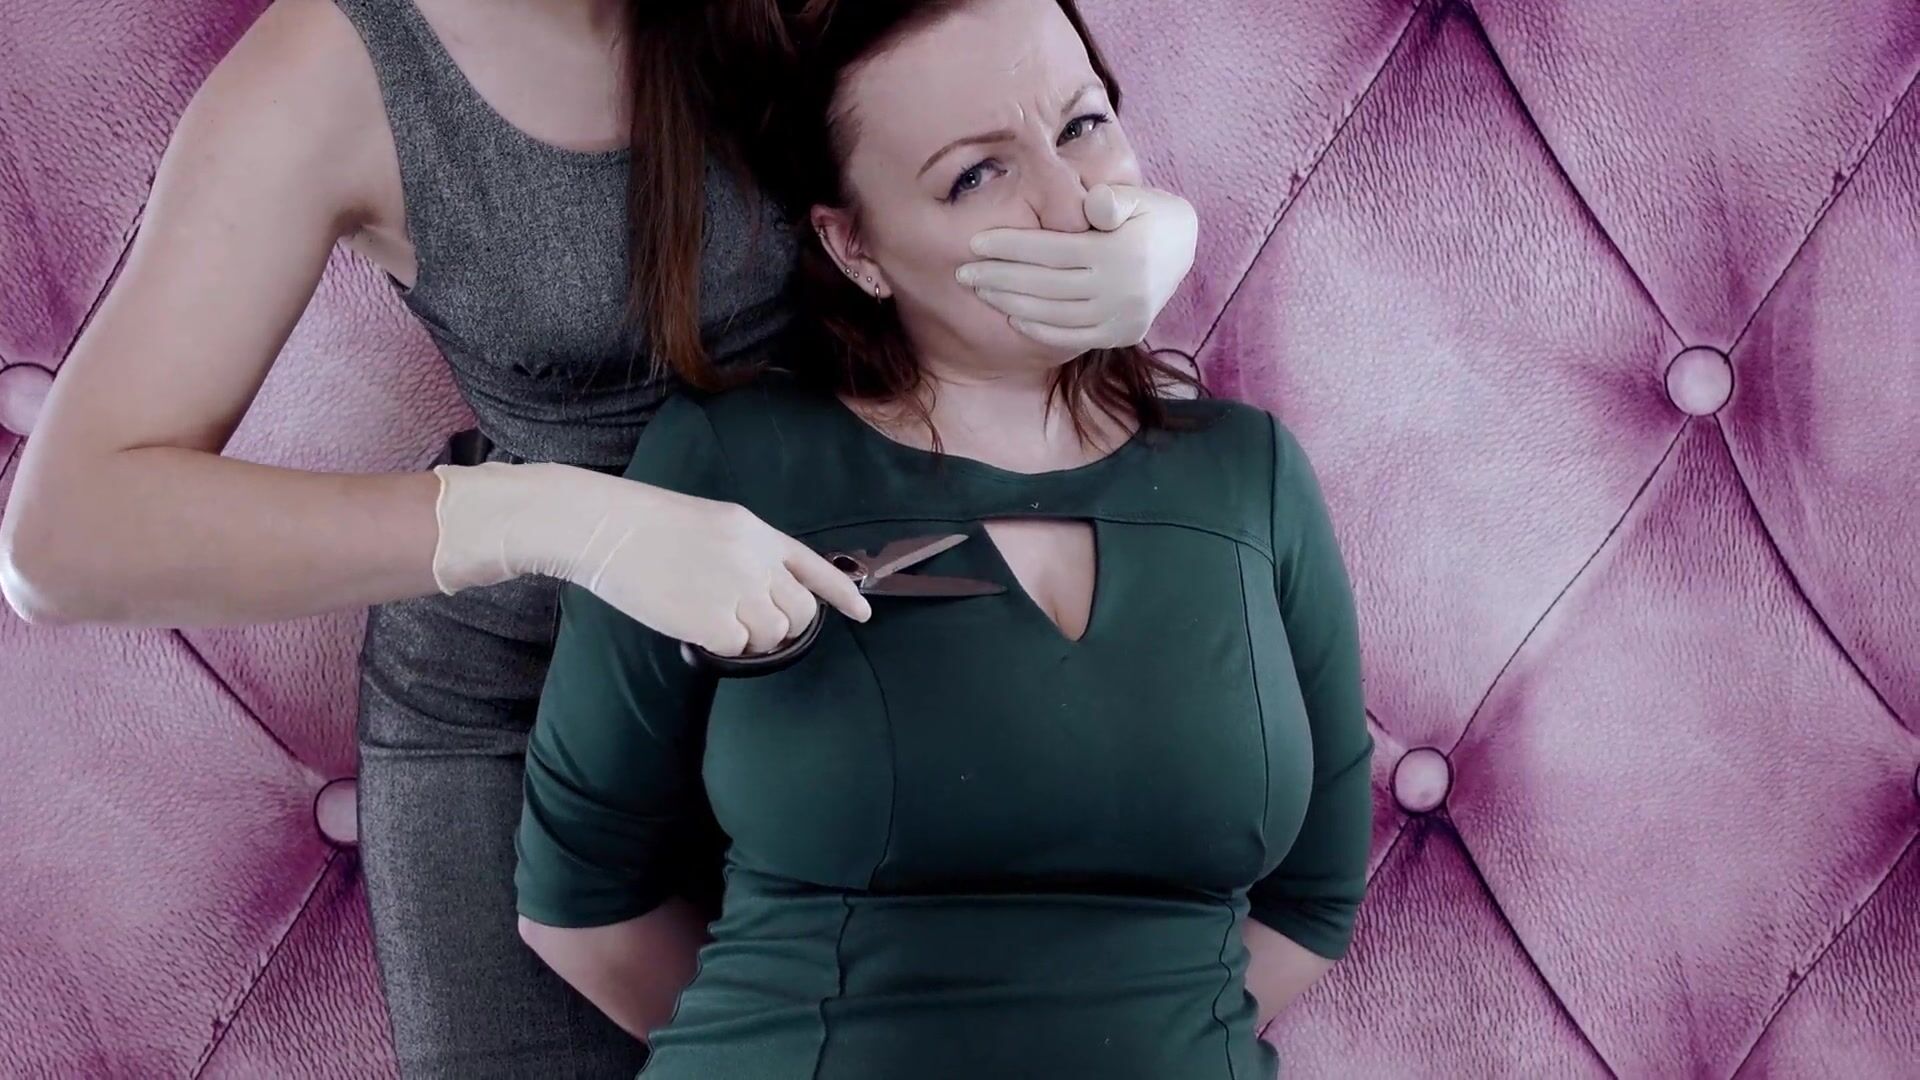 Lesbian roleplay cut dress fetish and medical latex gloves (Arya Grander and Mistress Priest) watch online